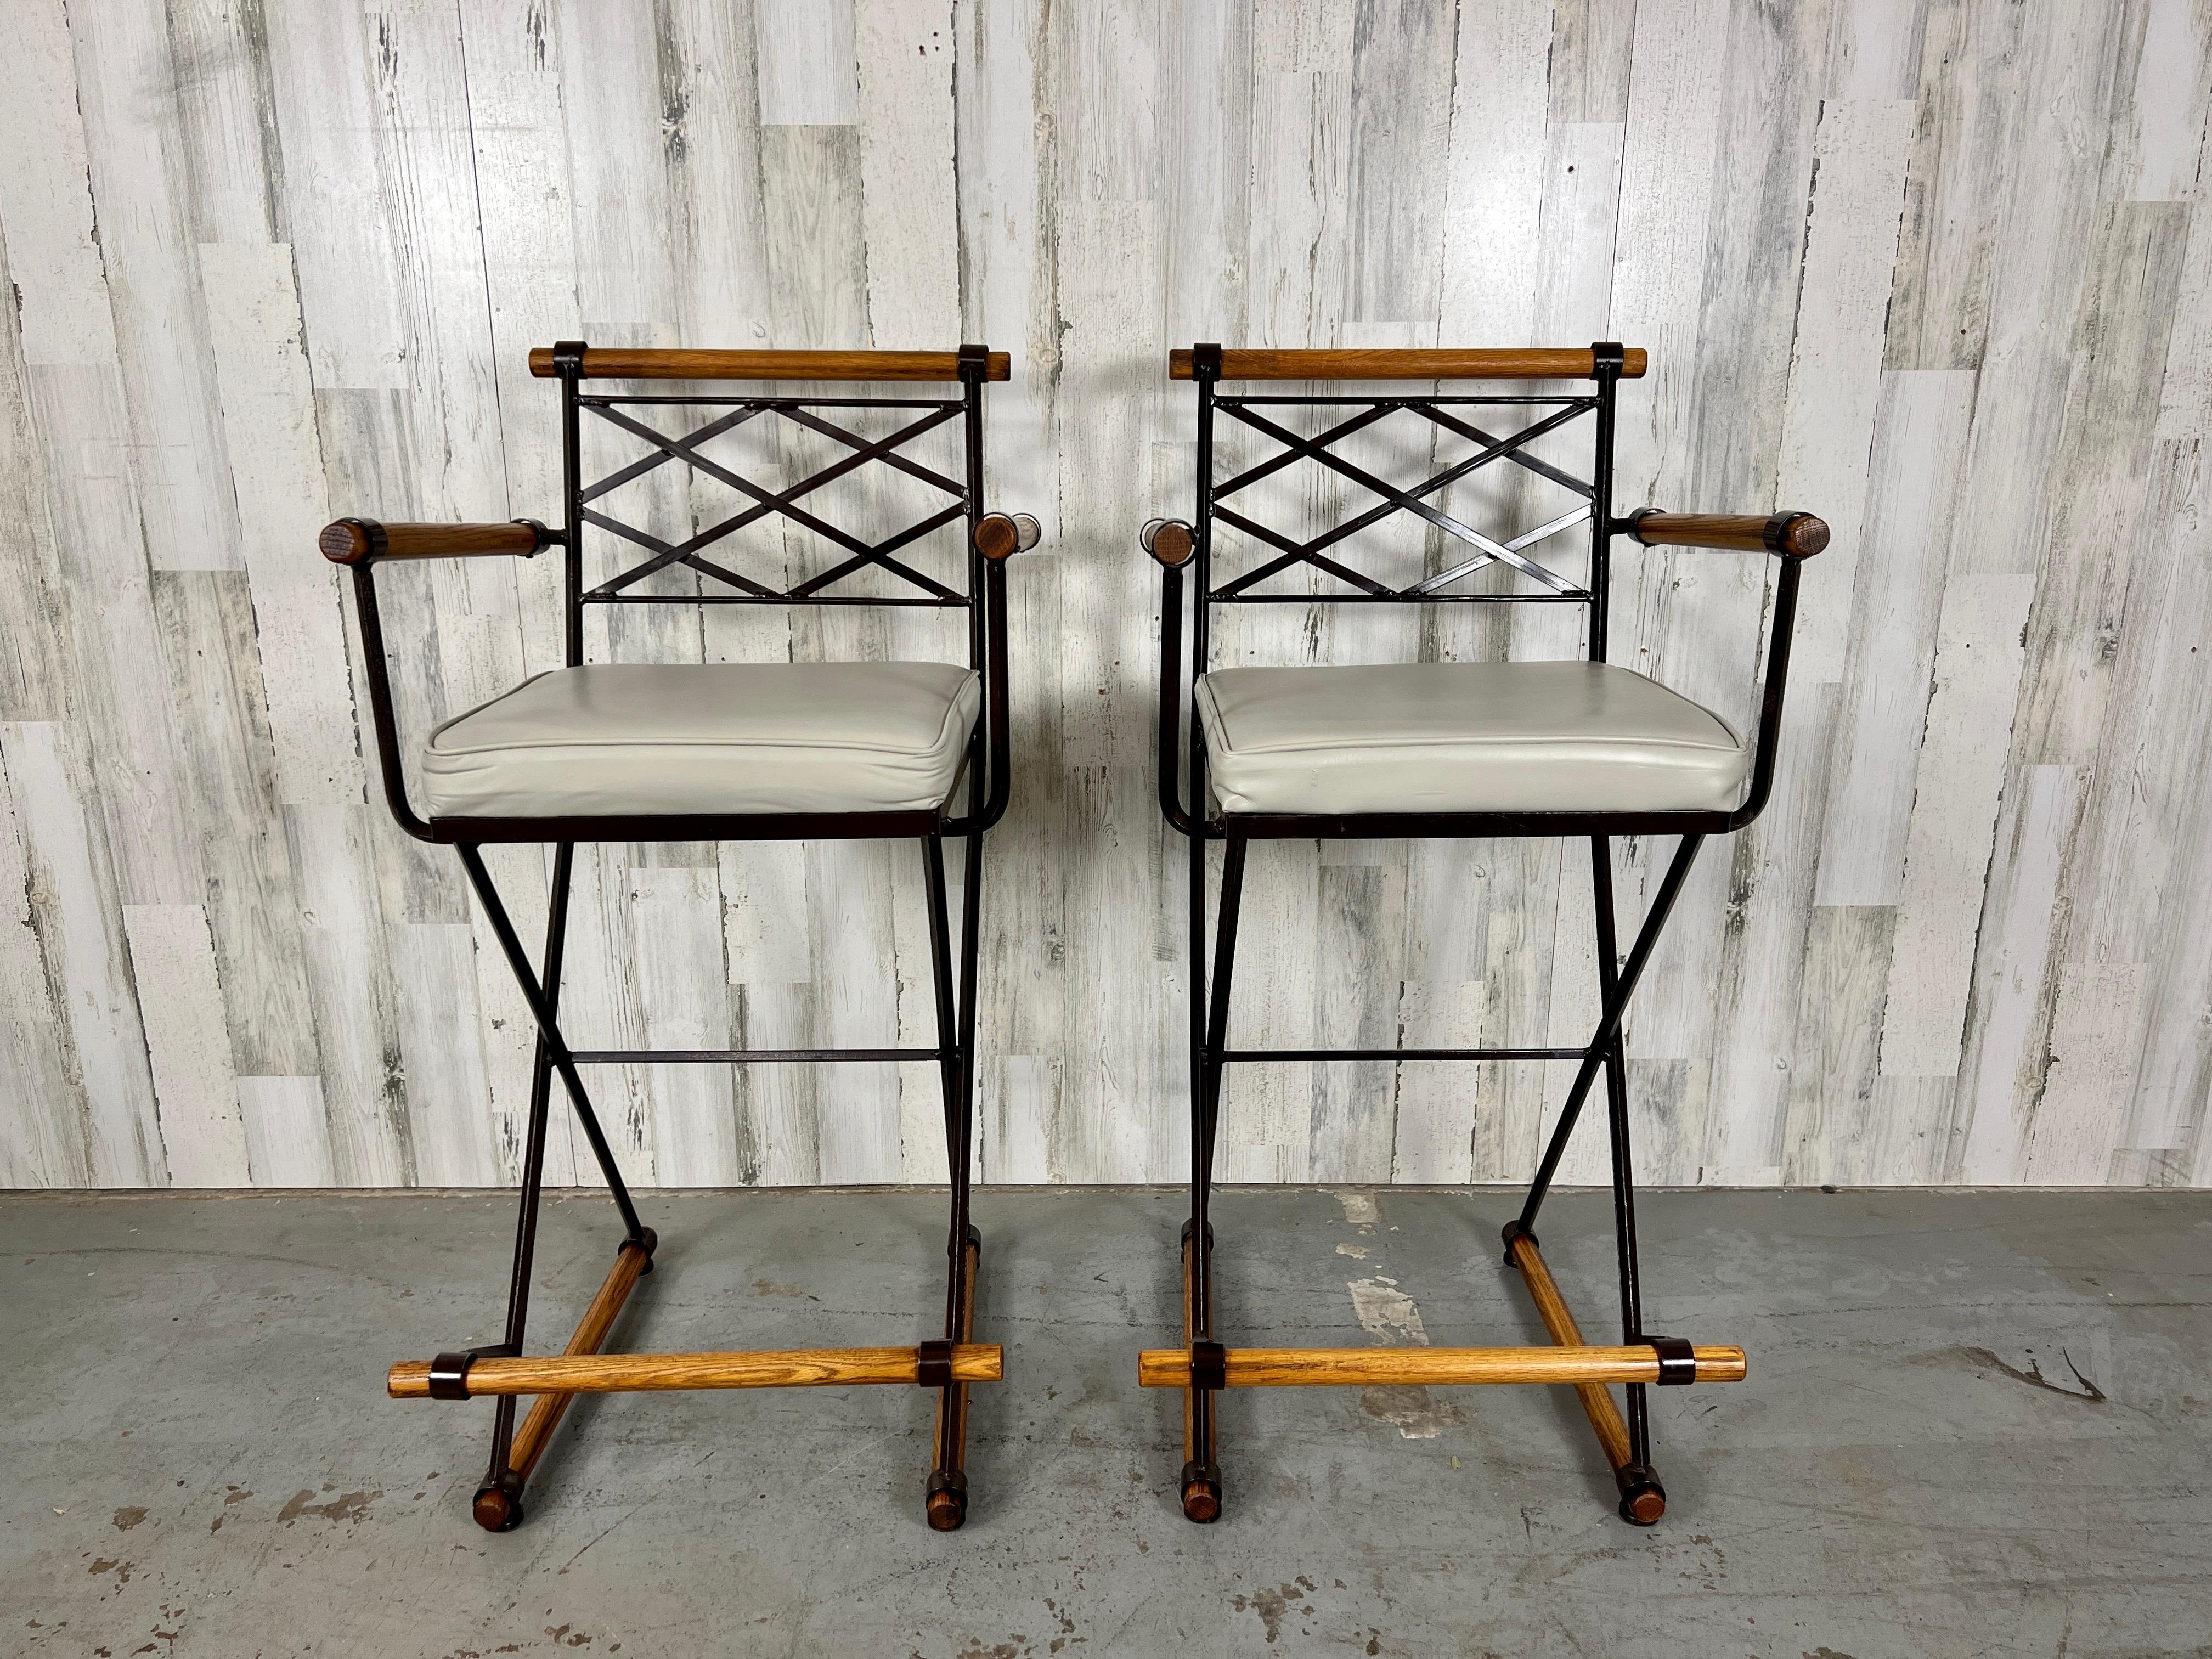 A duo of bar stools from Inca Products, USA, dating back to the 1960s and inspired by the design aesthetics of Cleo Baldon. These stools showcase a wrought iron framework in chocolate brown powder-coat with intricately designed lattice backrests.